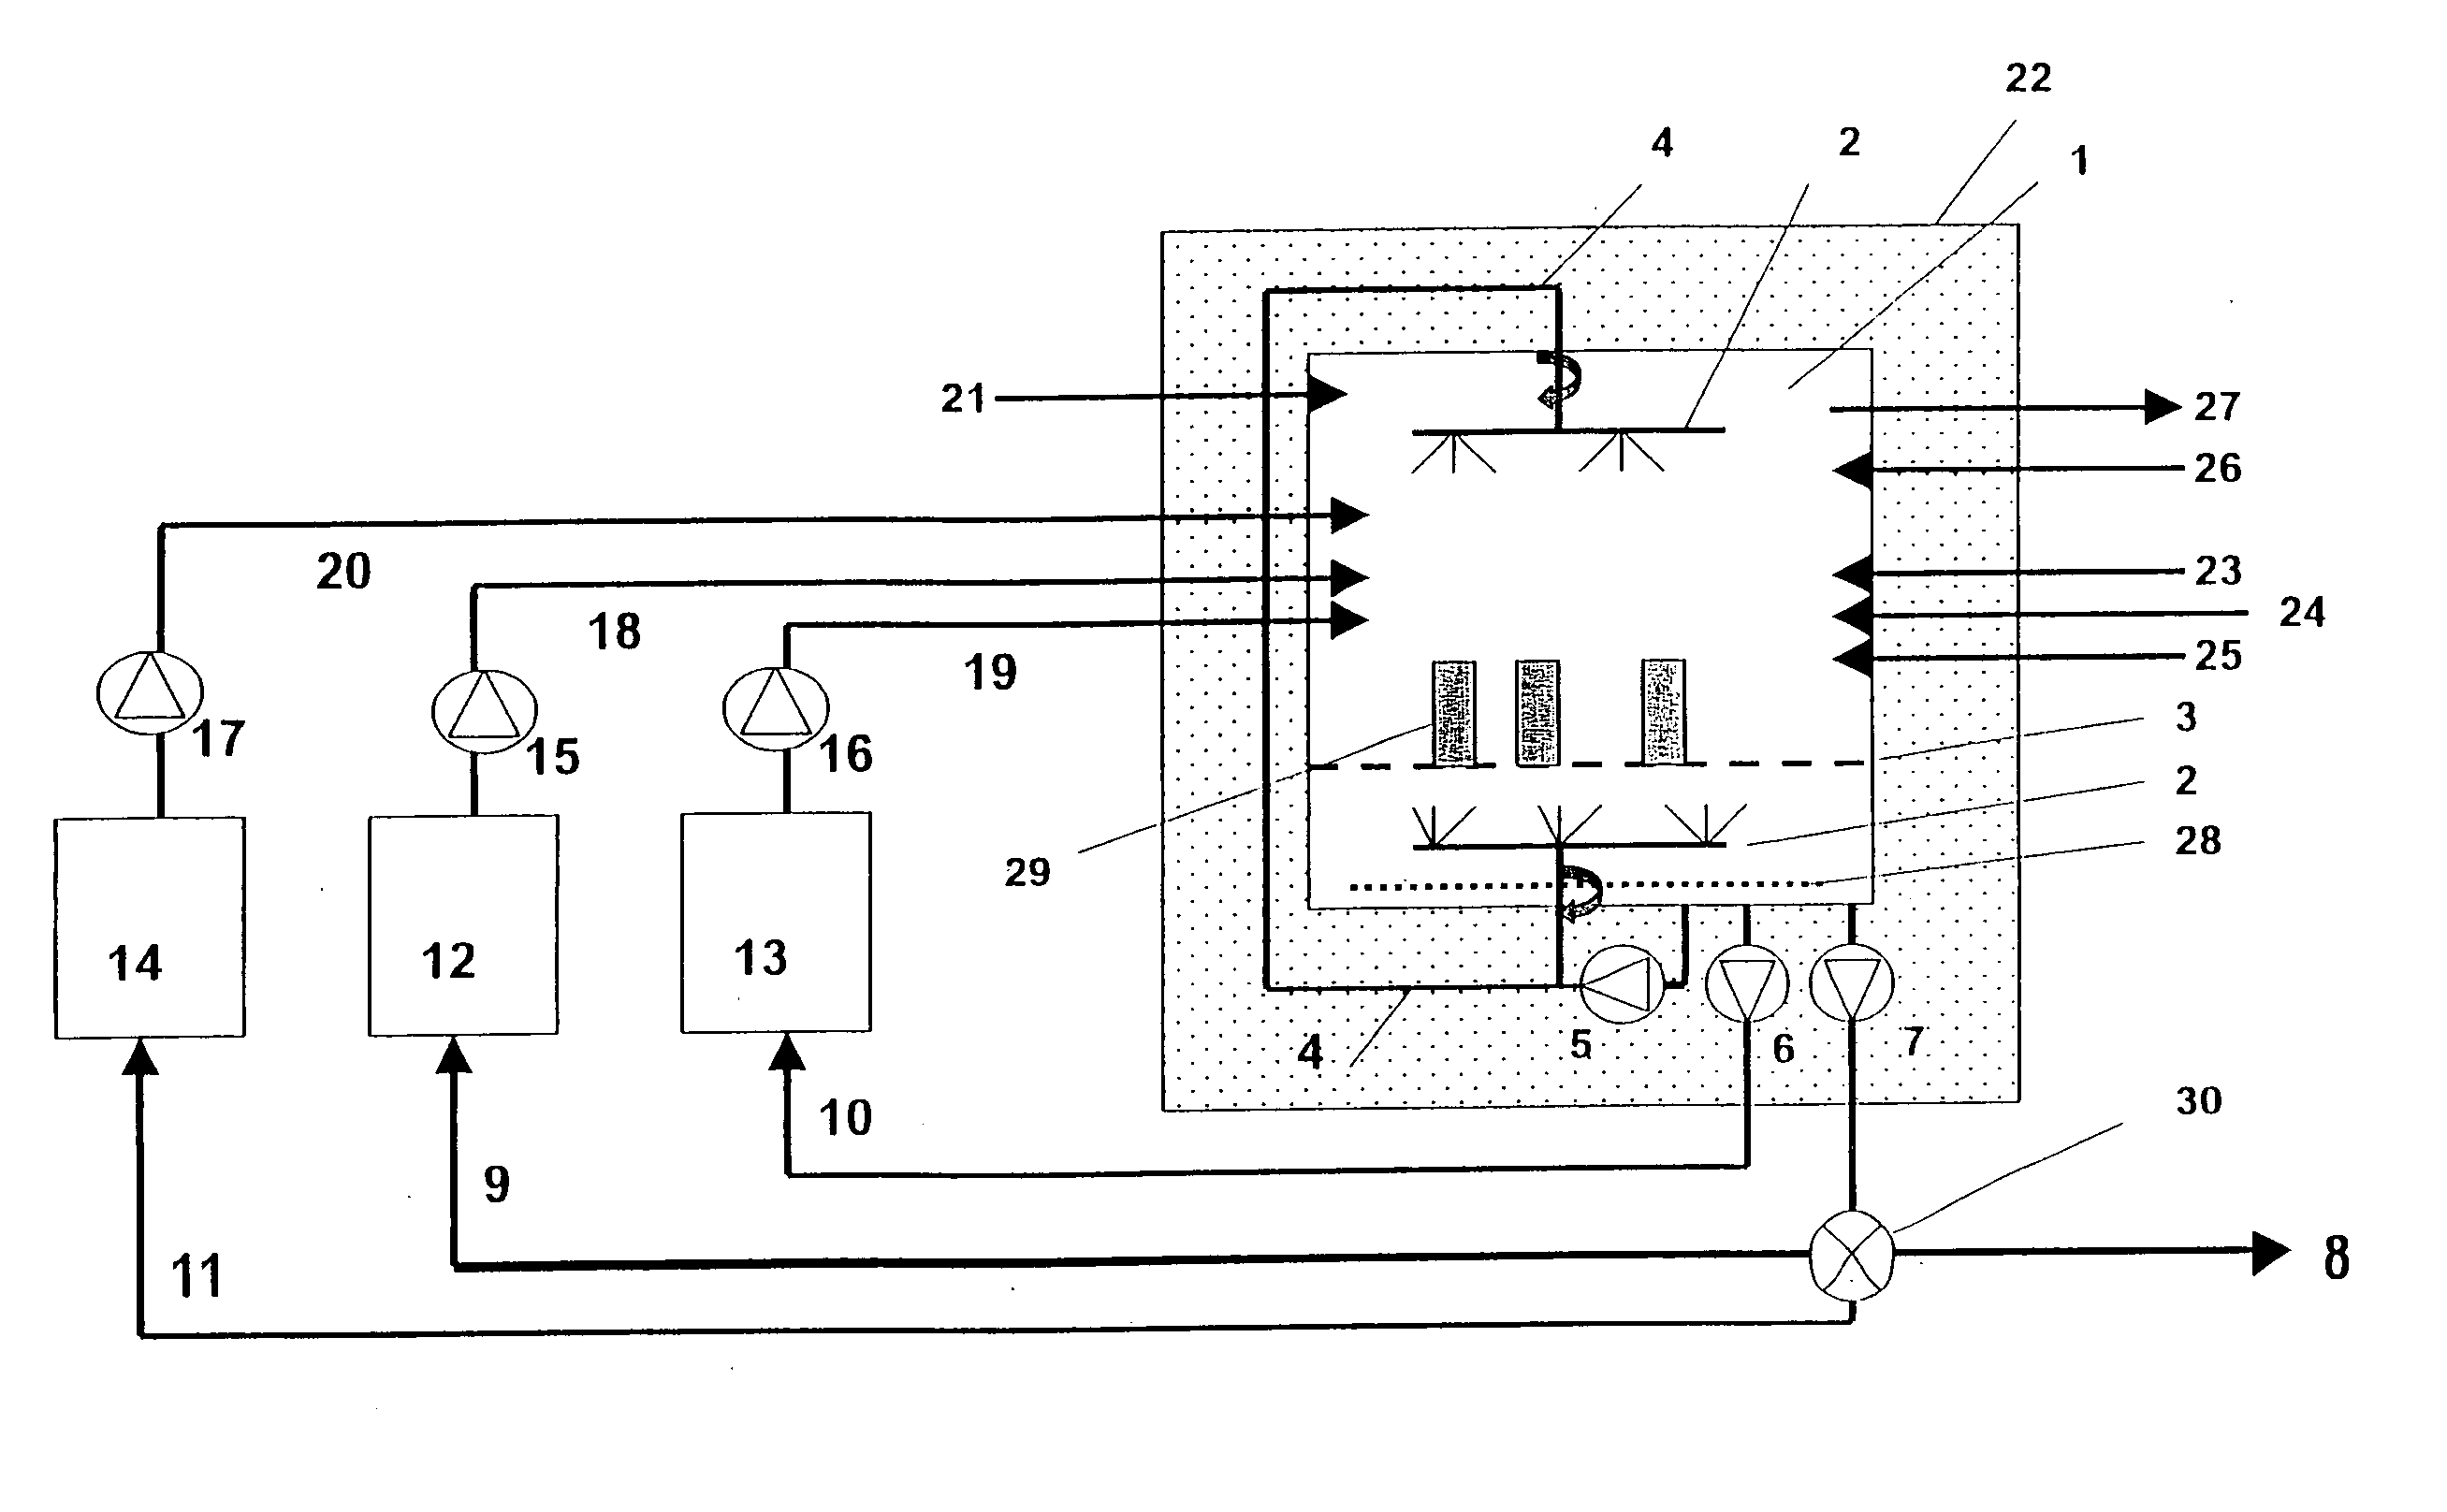 Stripping apparatus and method for removal of coating on metal surfaces